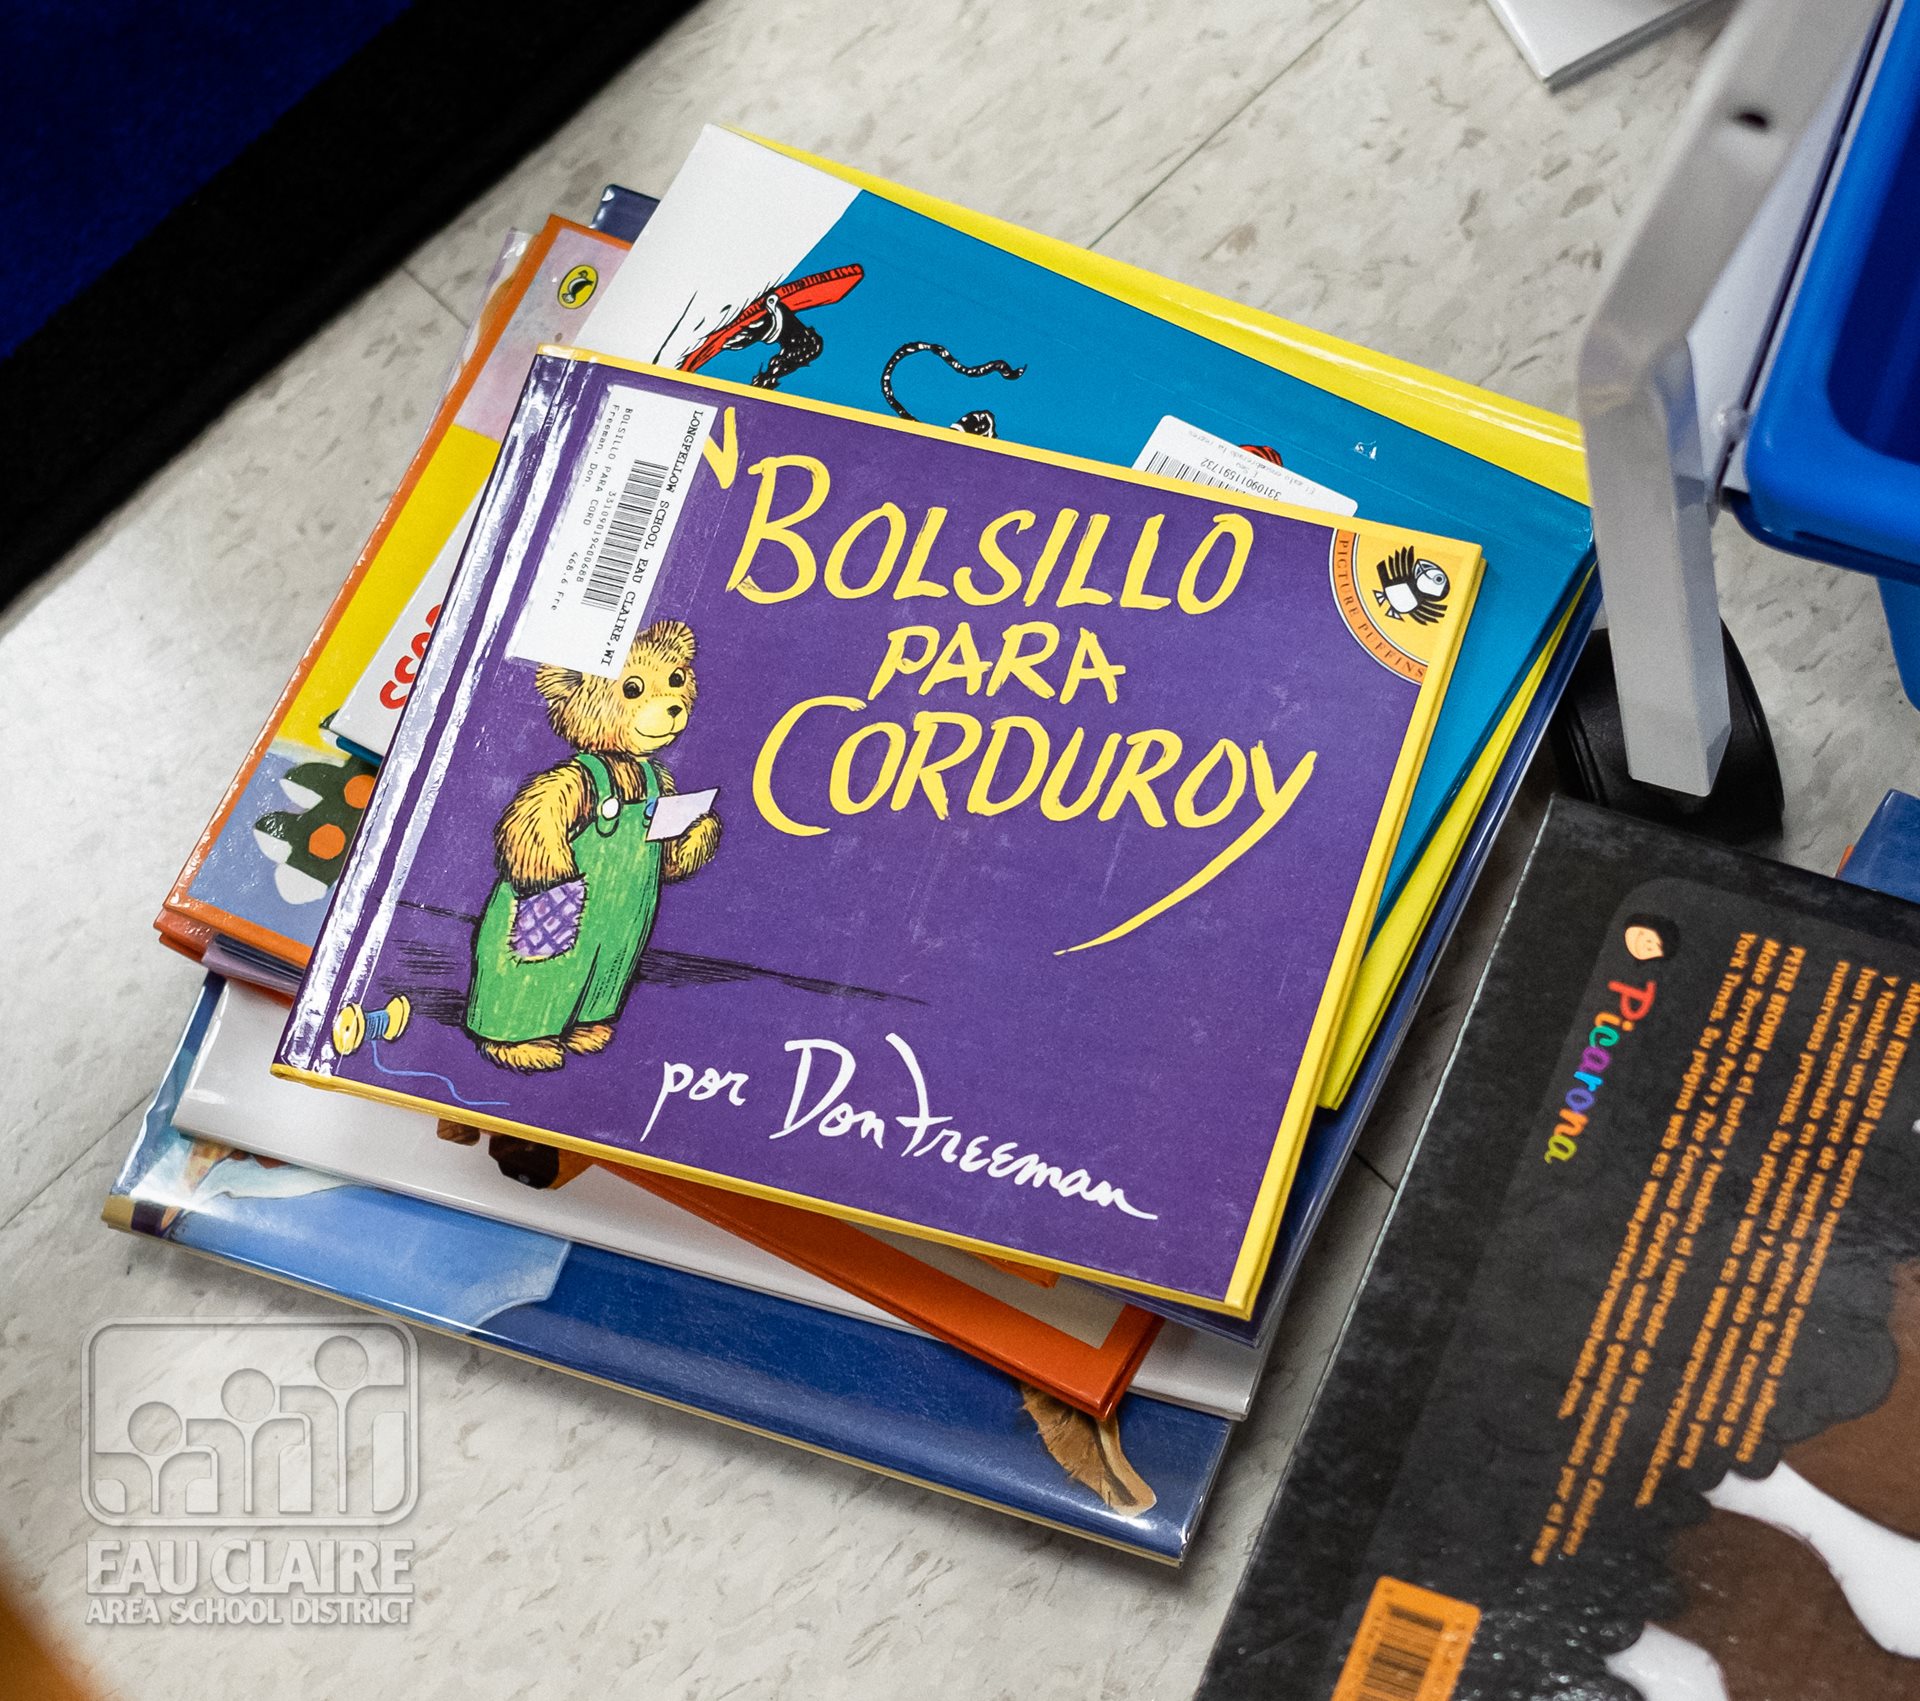 A picture of a stack of young children's books with the title "Bolsillo Para Courduroy" on the top.